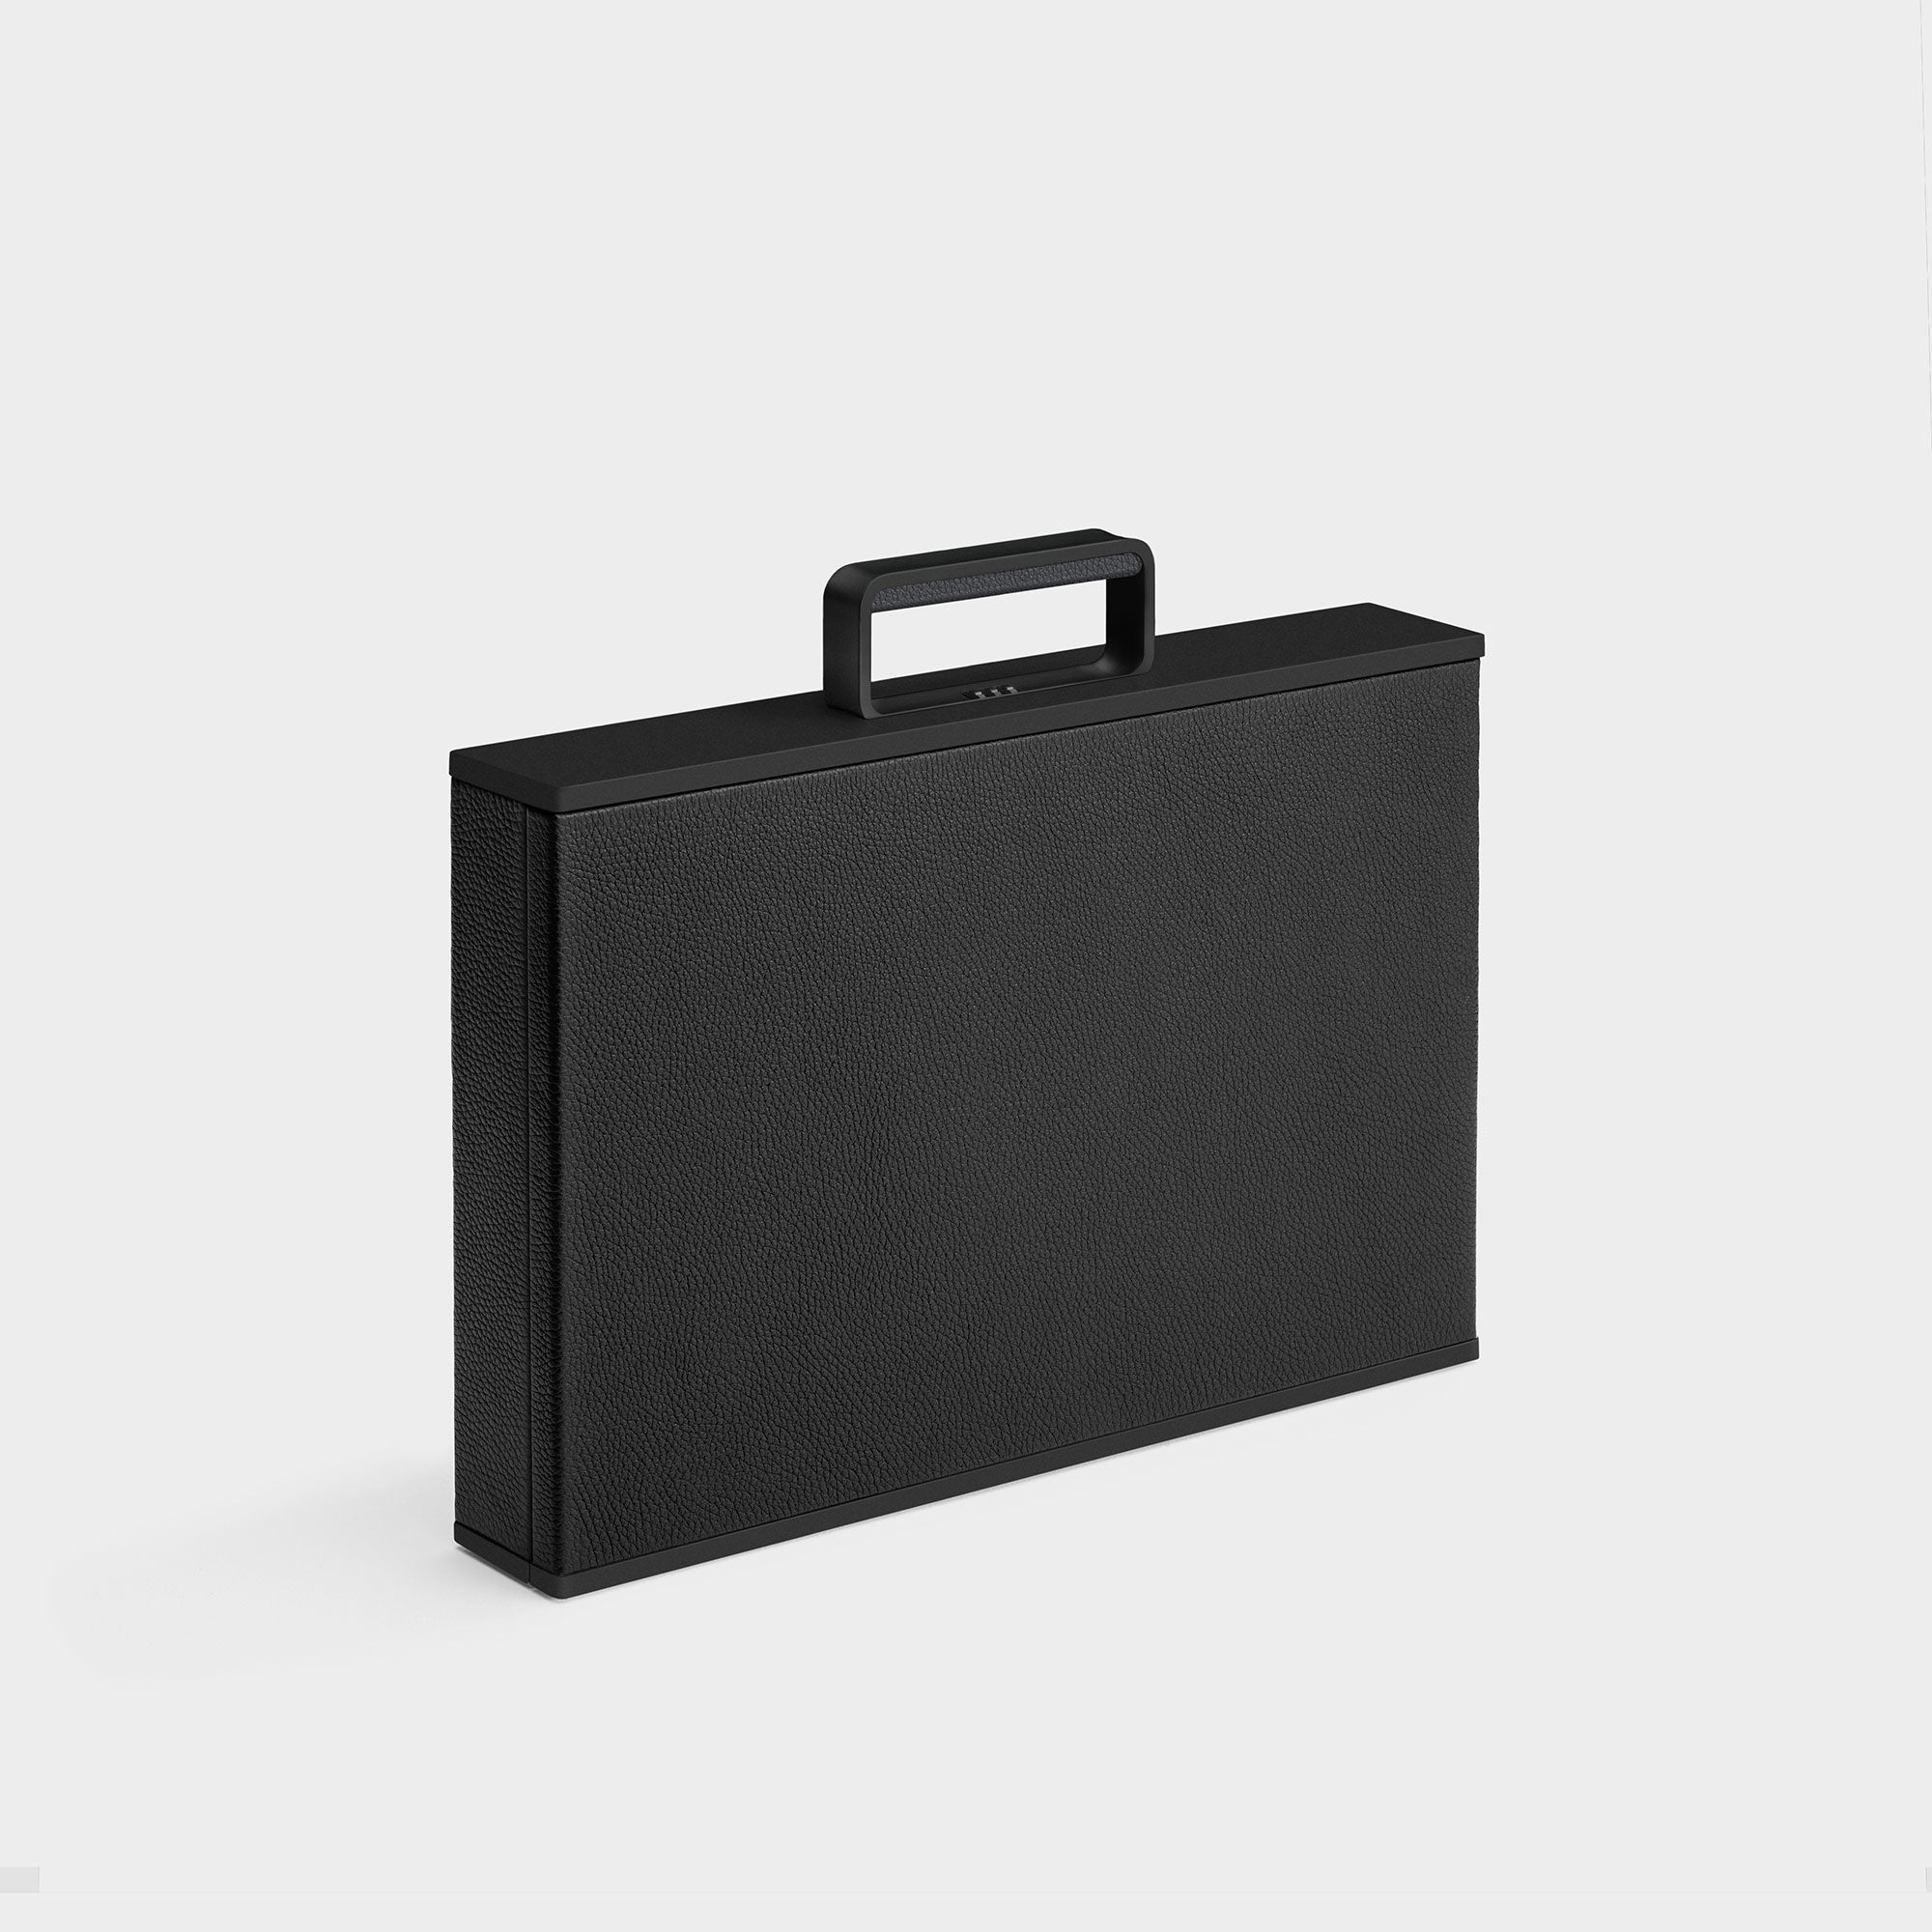 Charles Simon Mackenzie briefcase in all black made from aluminum and carbon fiber casing, fine French leather and Alcantara lining